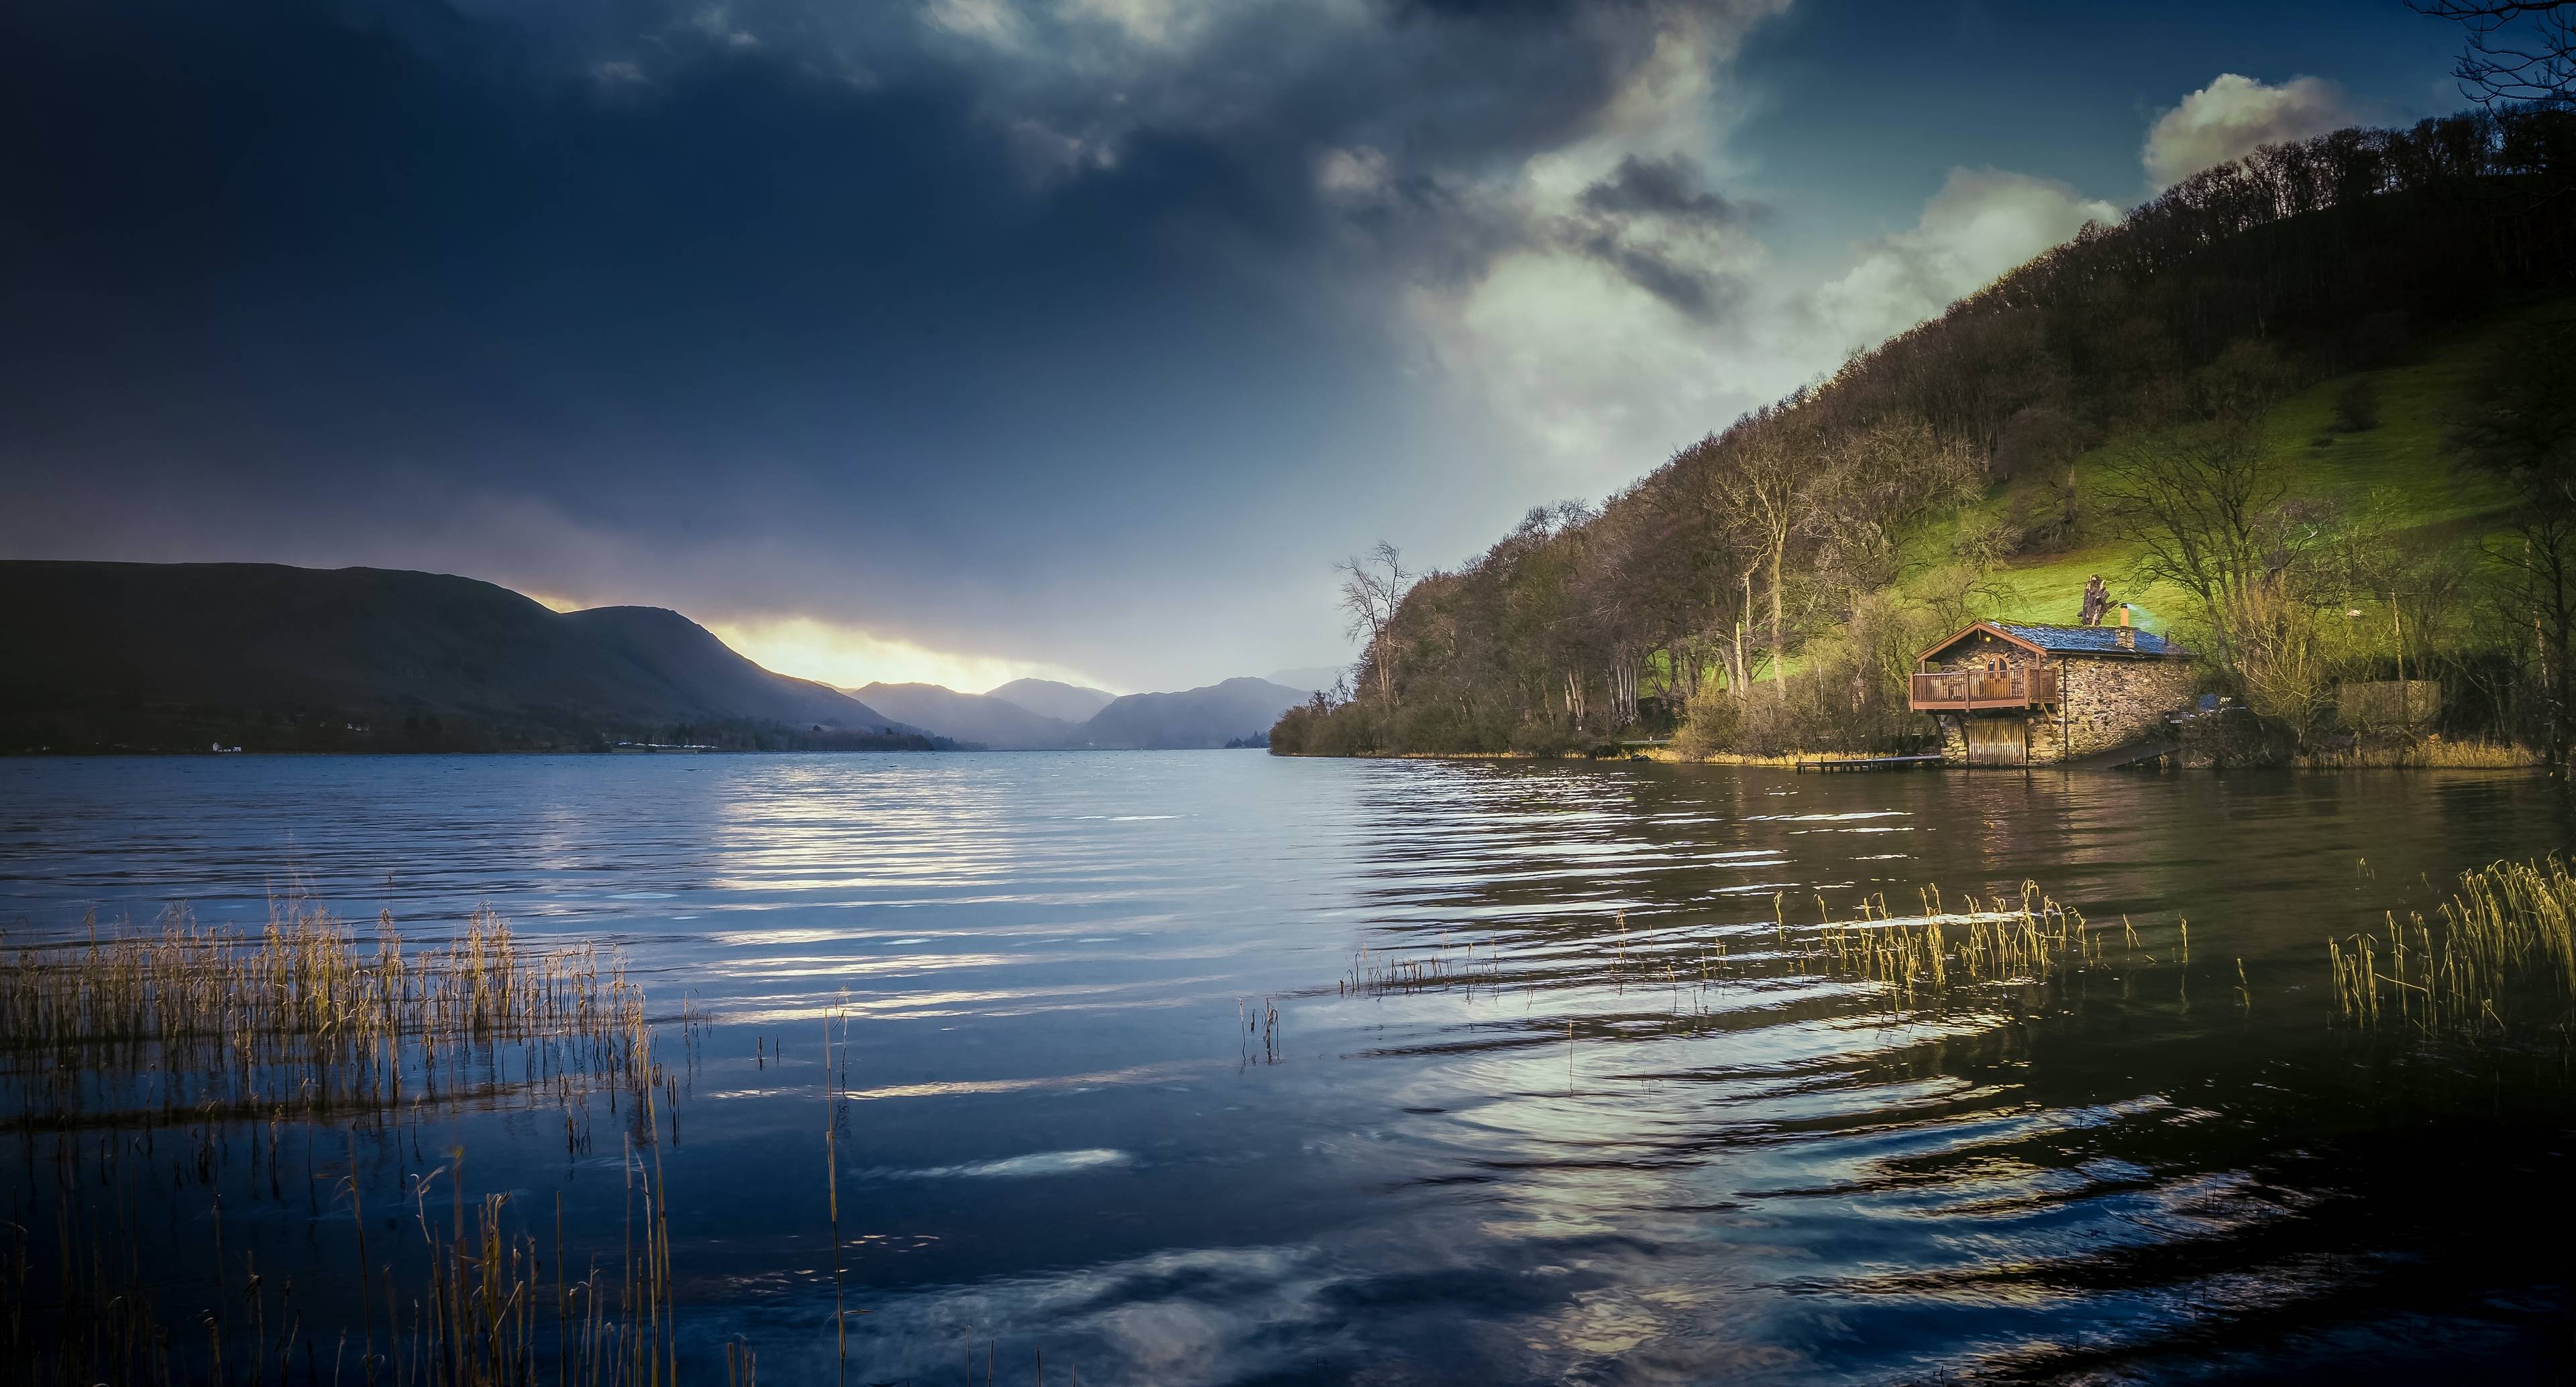 Ullswater Cruise with Hiking and an Abbey